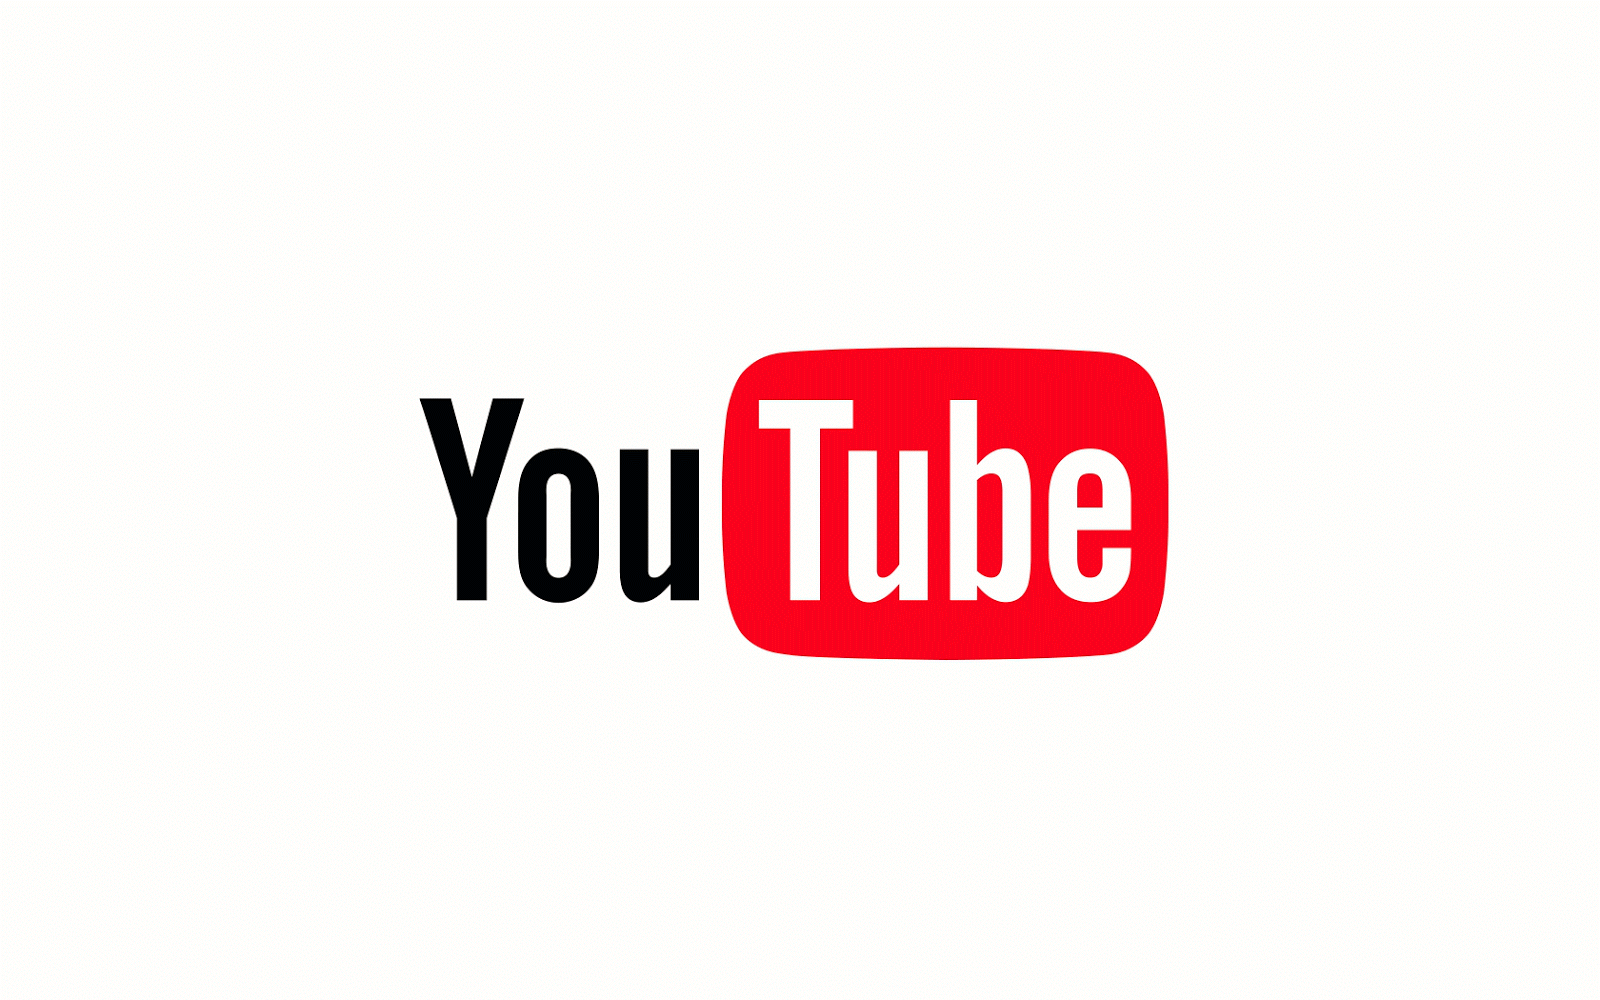 YouTube logo old to new